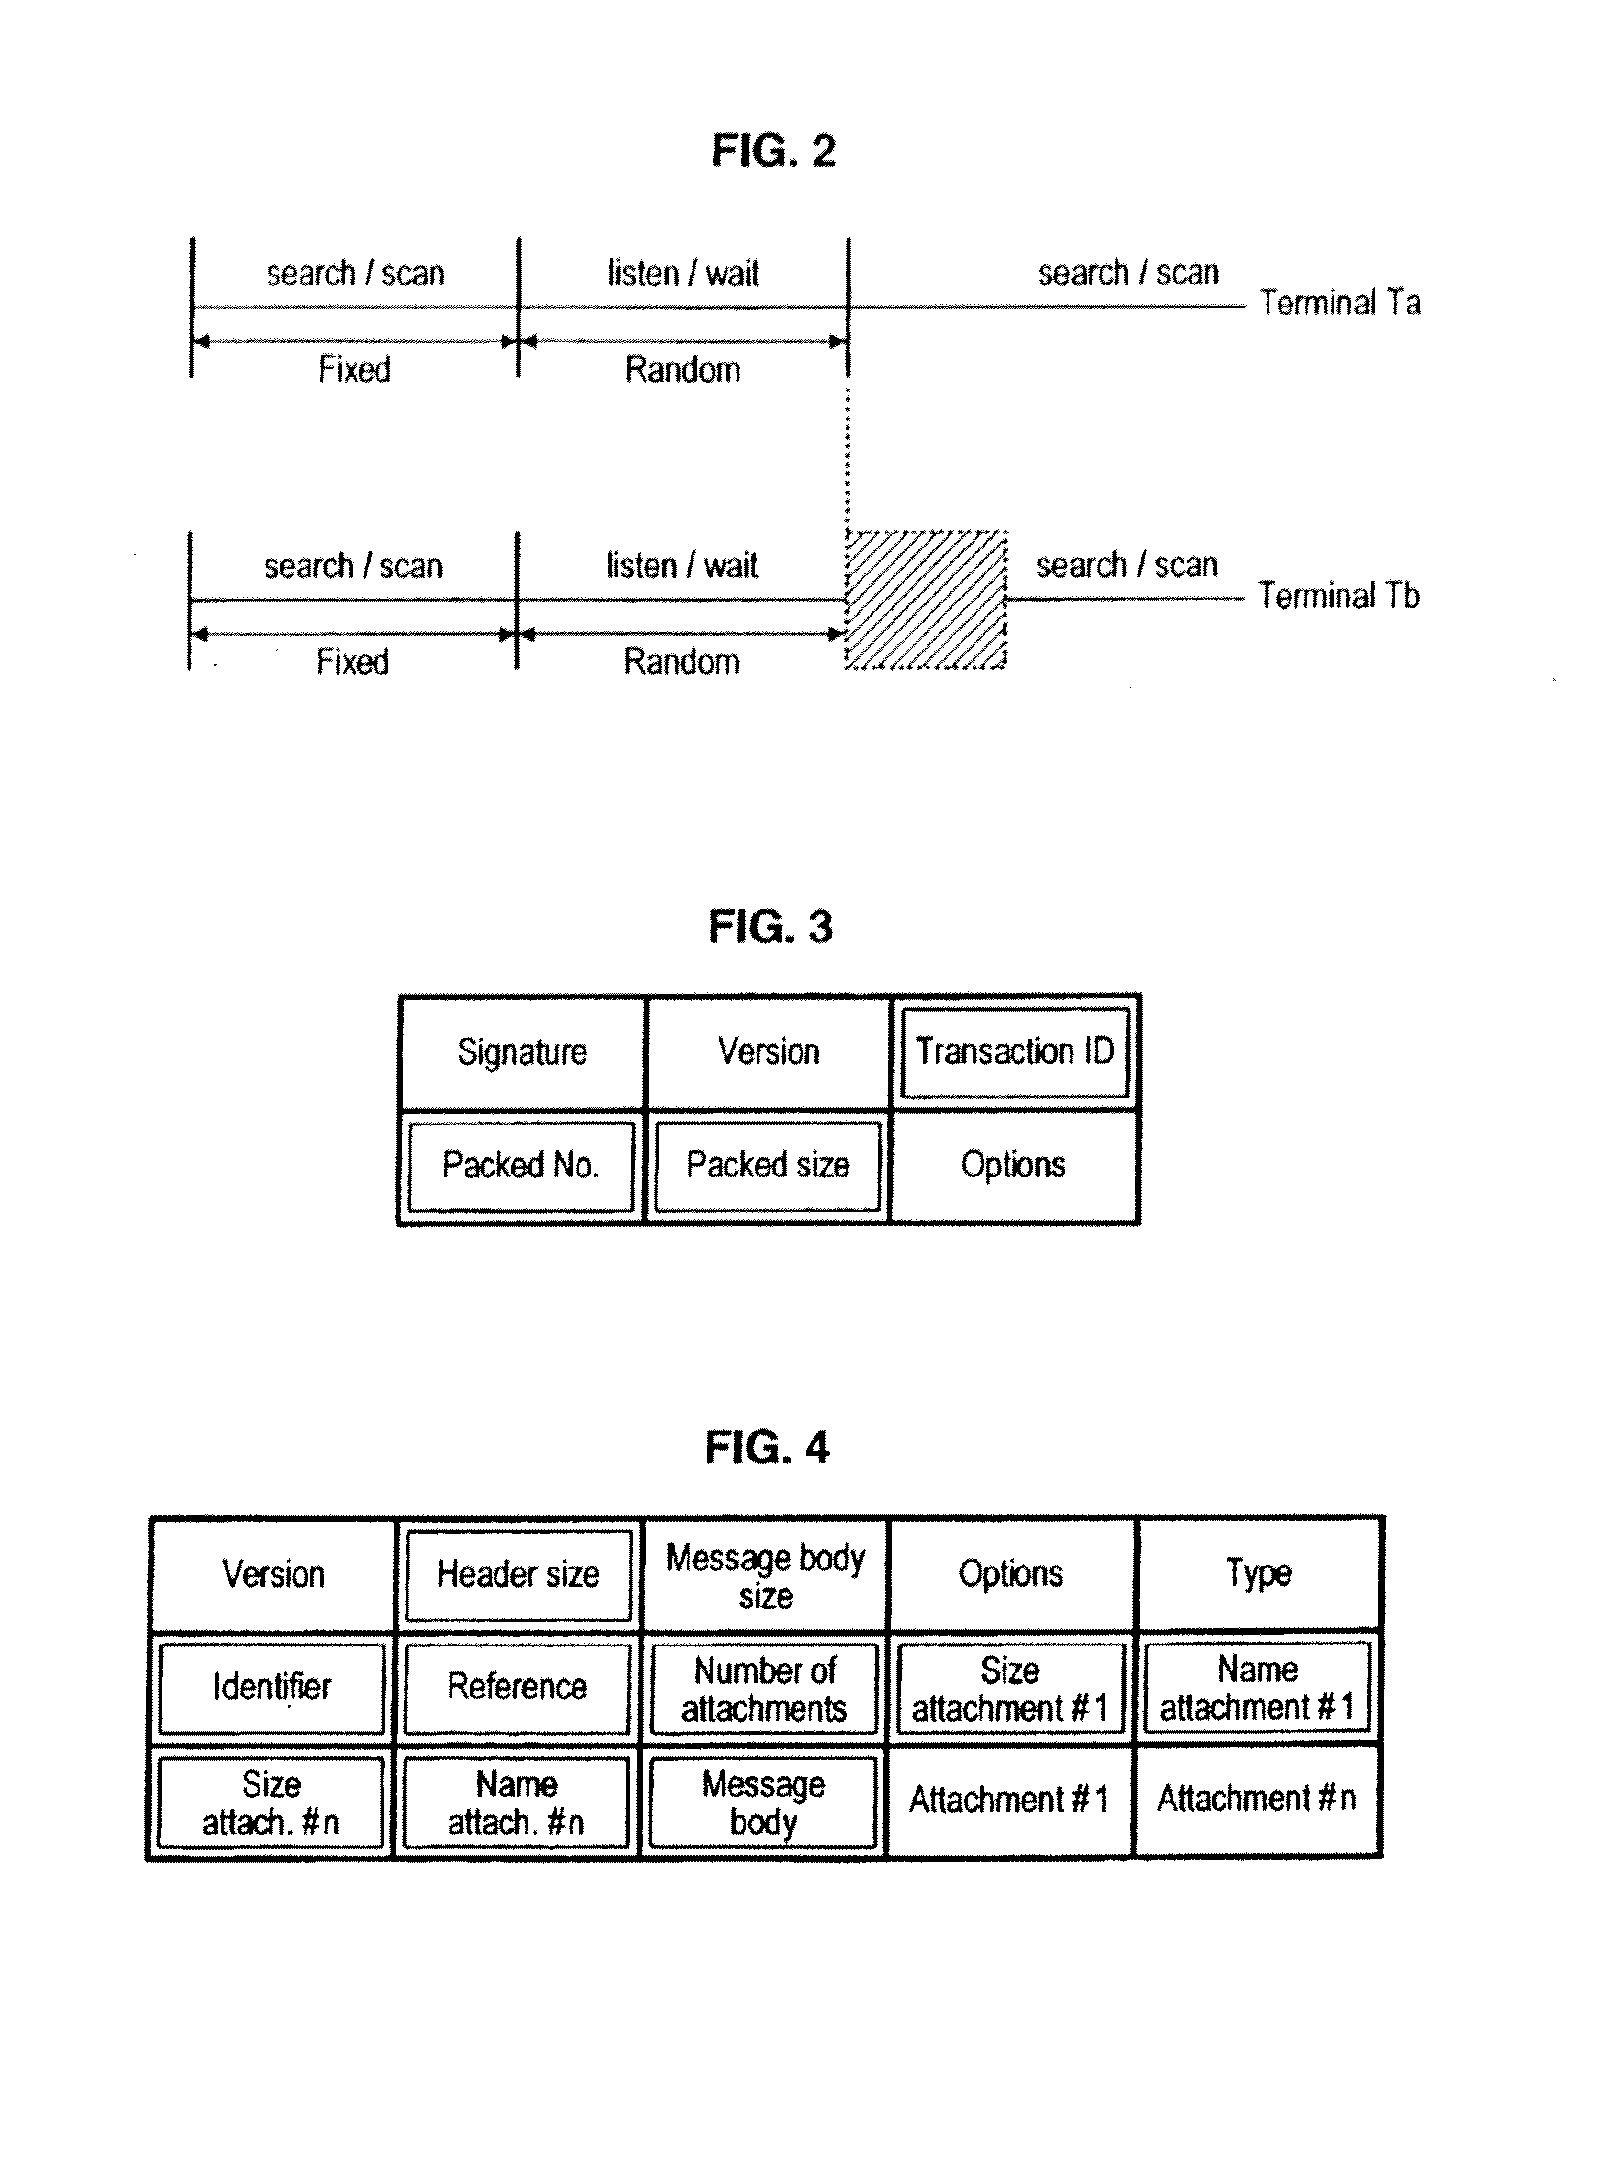 Methods and systems for community-wide information exchange via individual communications terminals